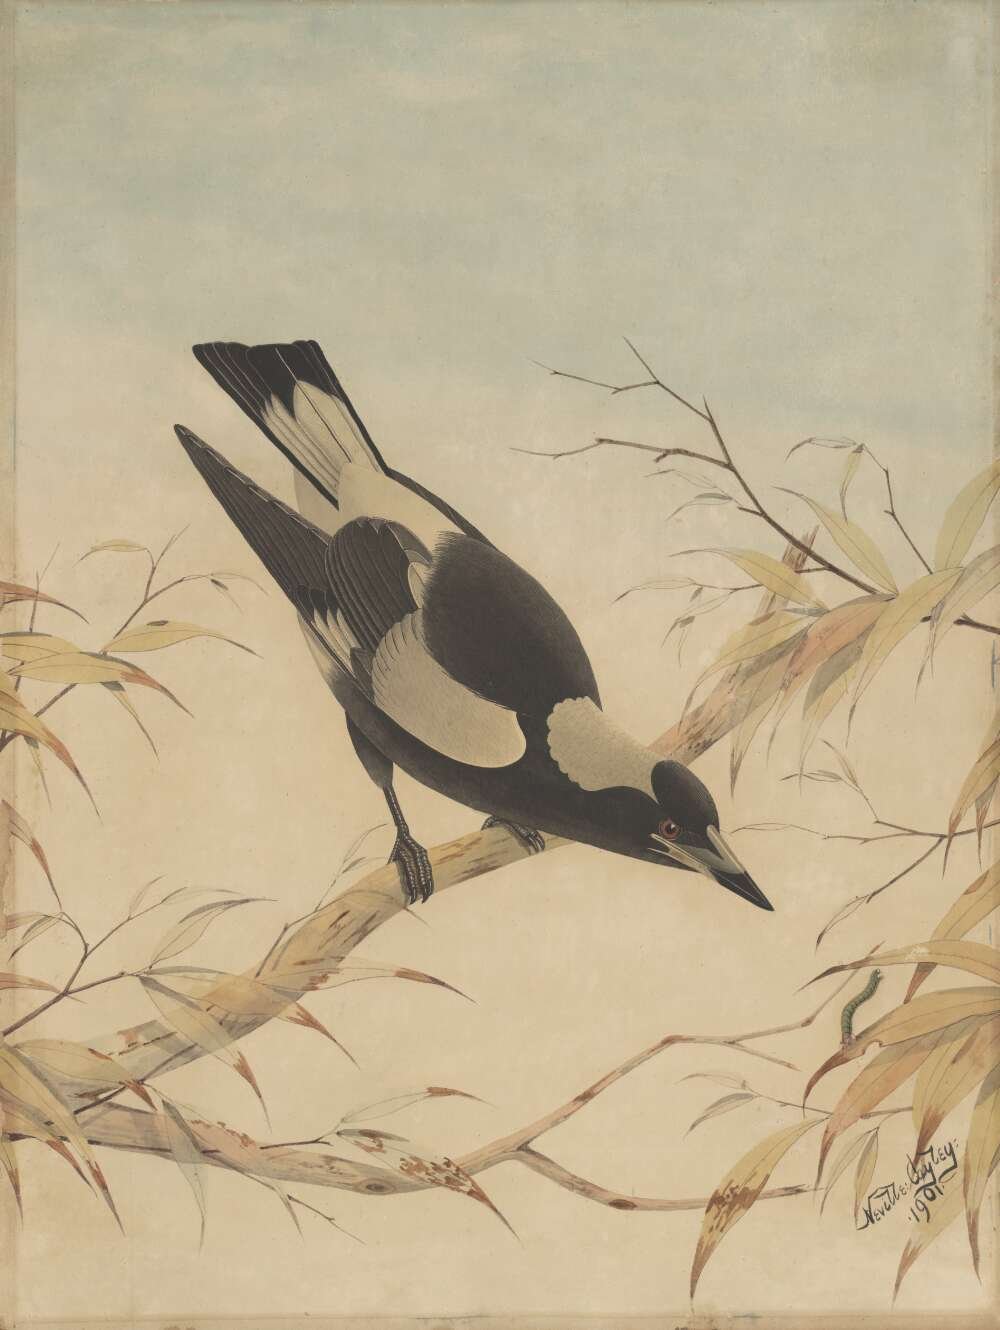 Watercolour painting of a magpie perched on a branch